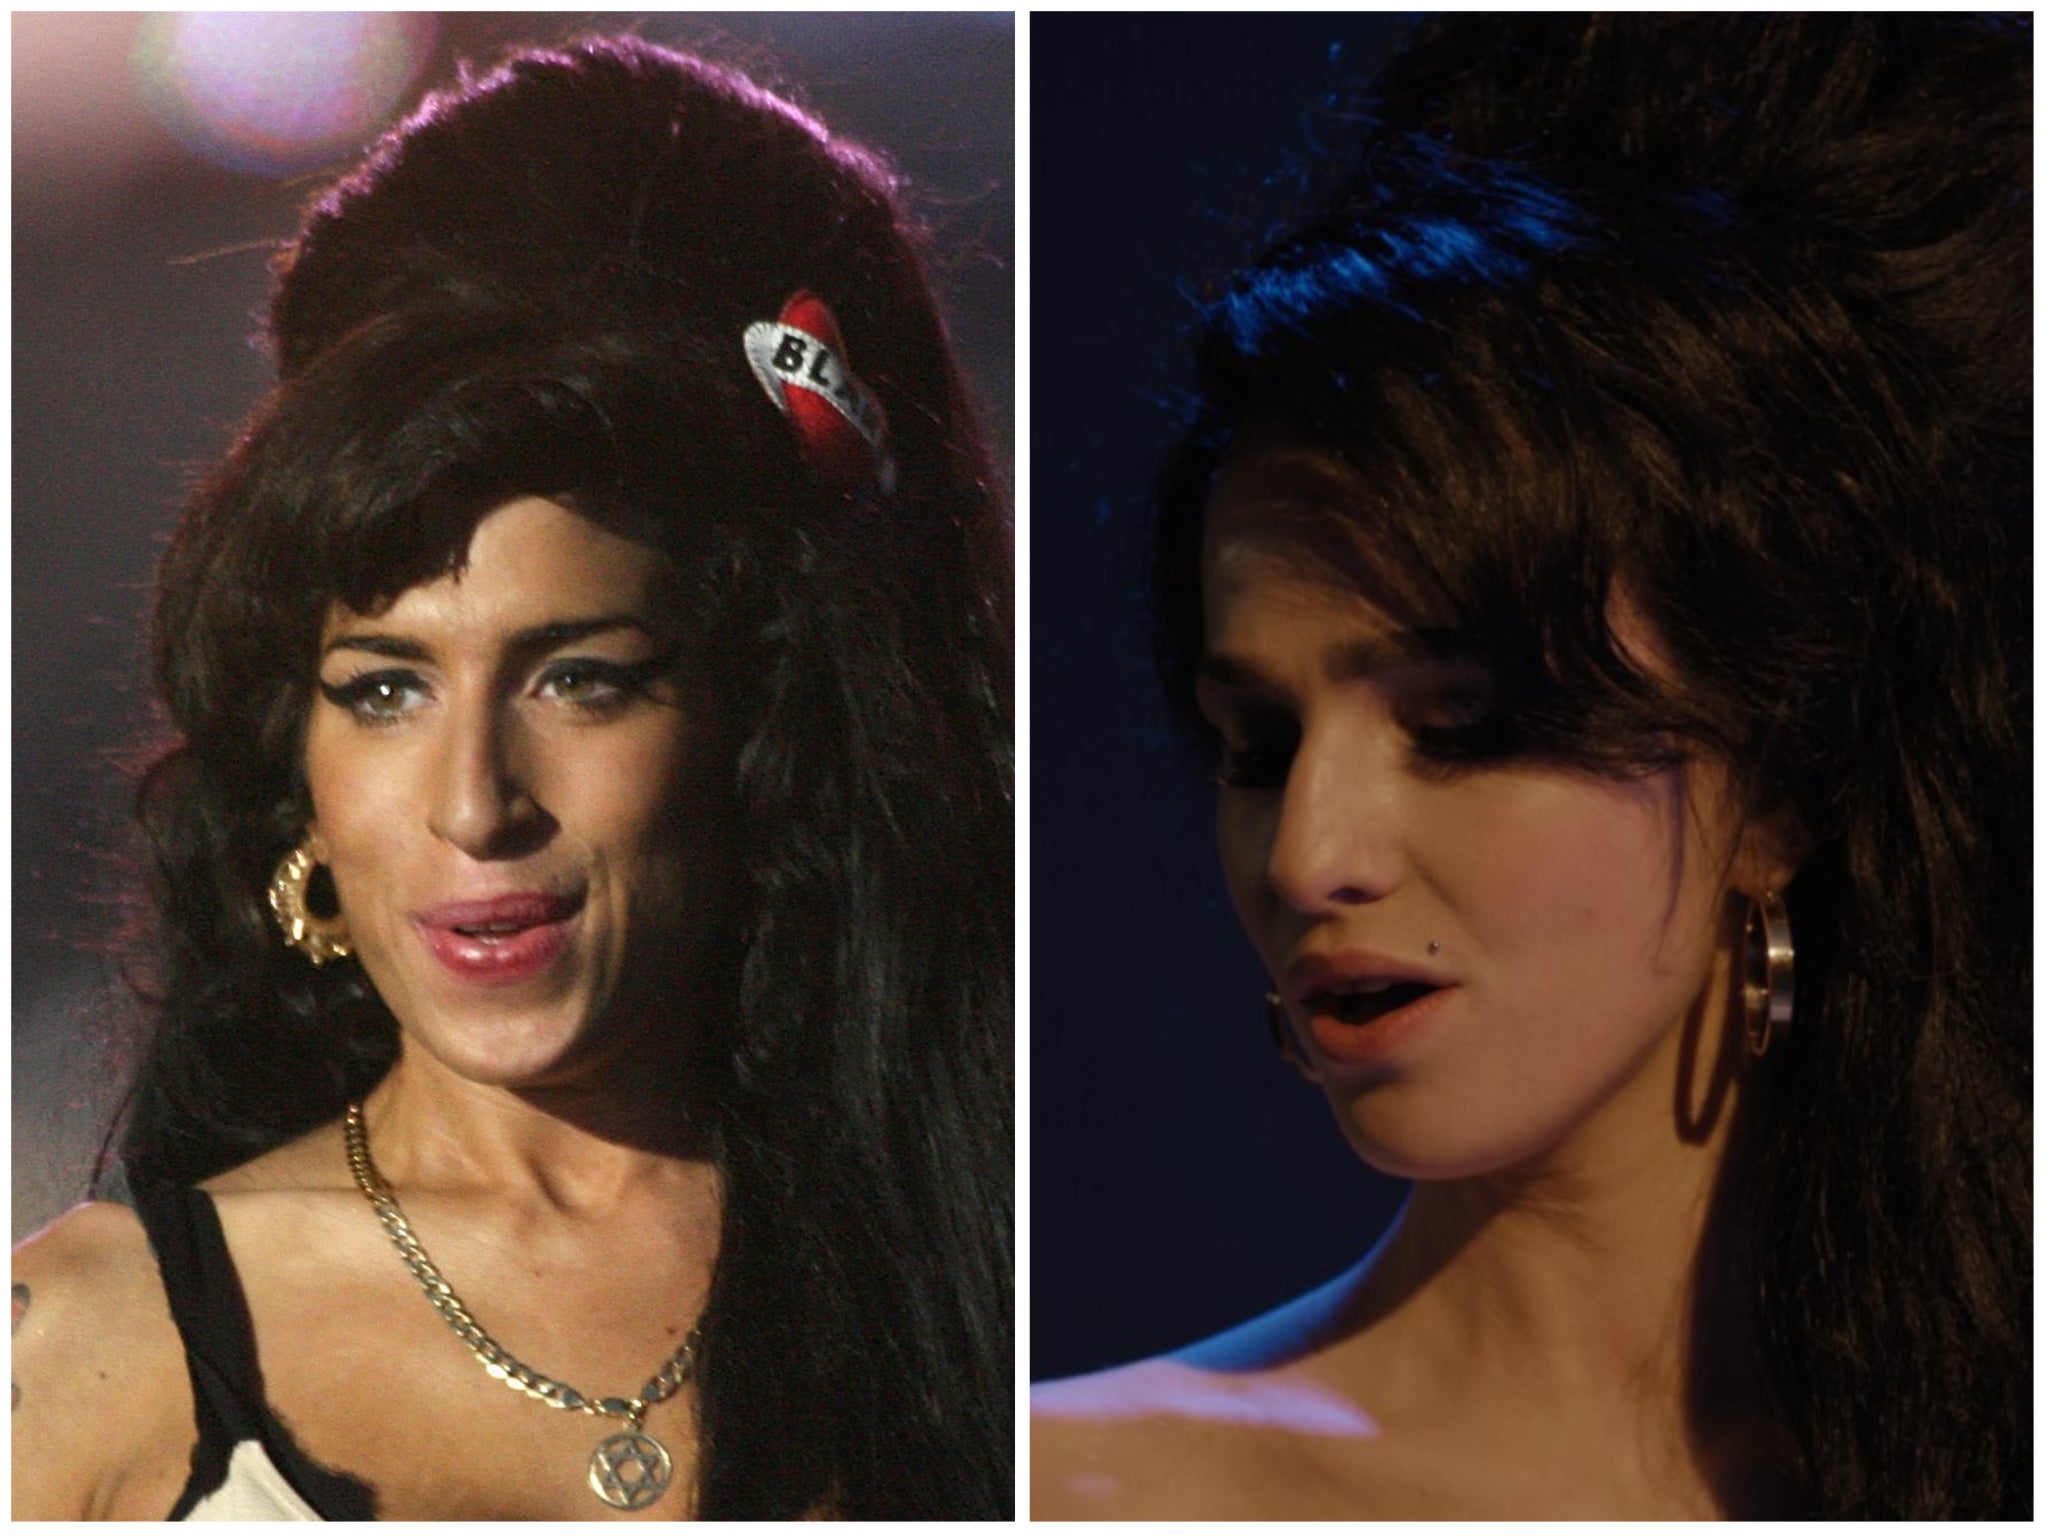 Amy Winehouse biopic 'Back to Black': Release date, cast